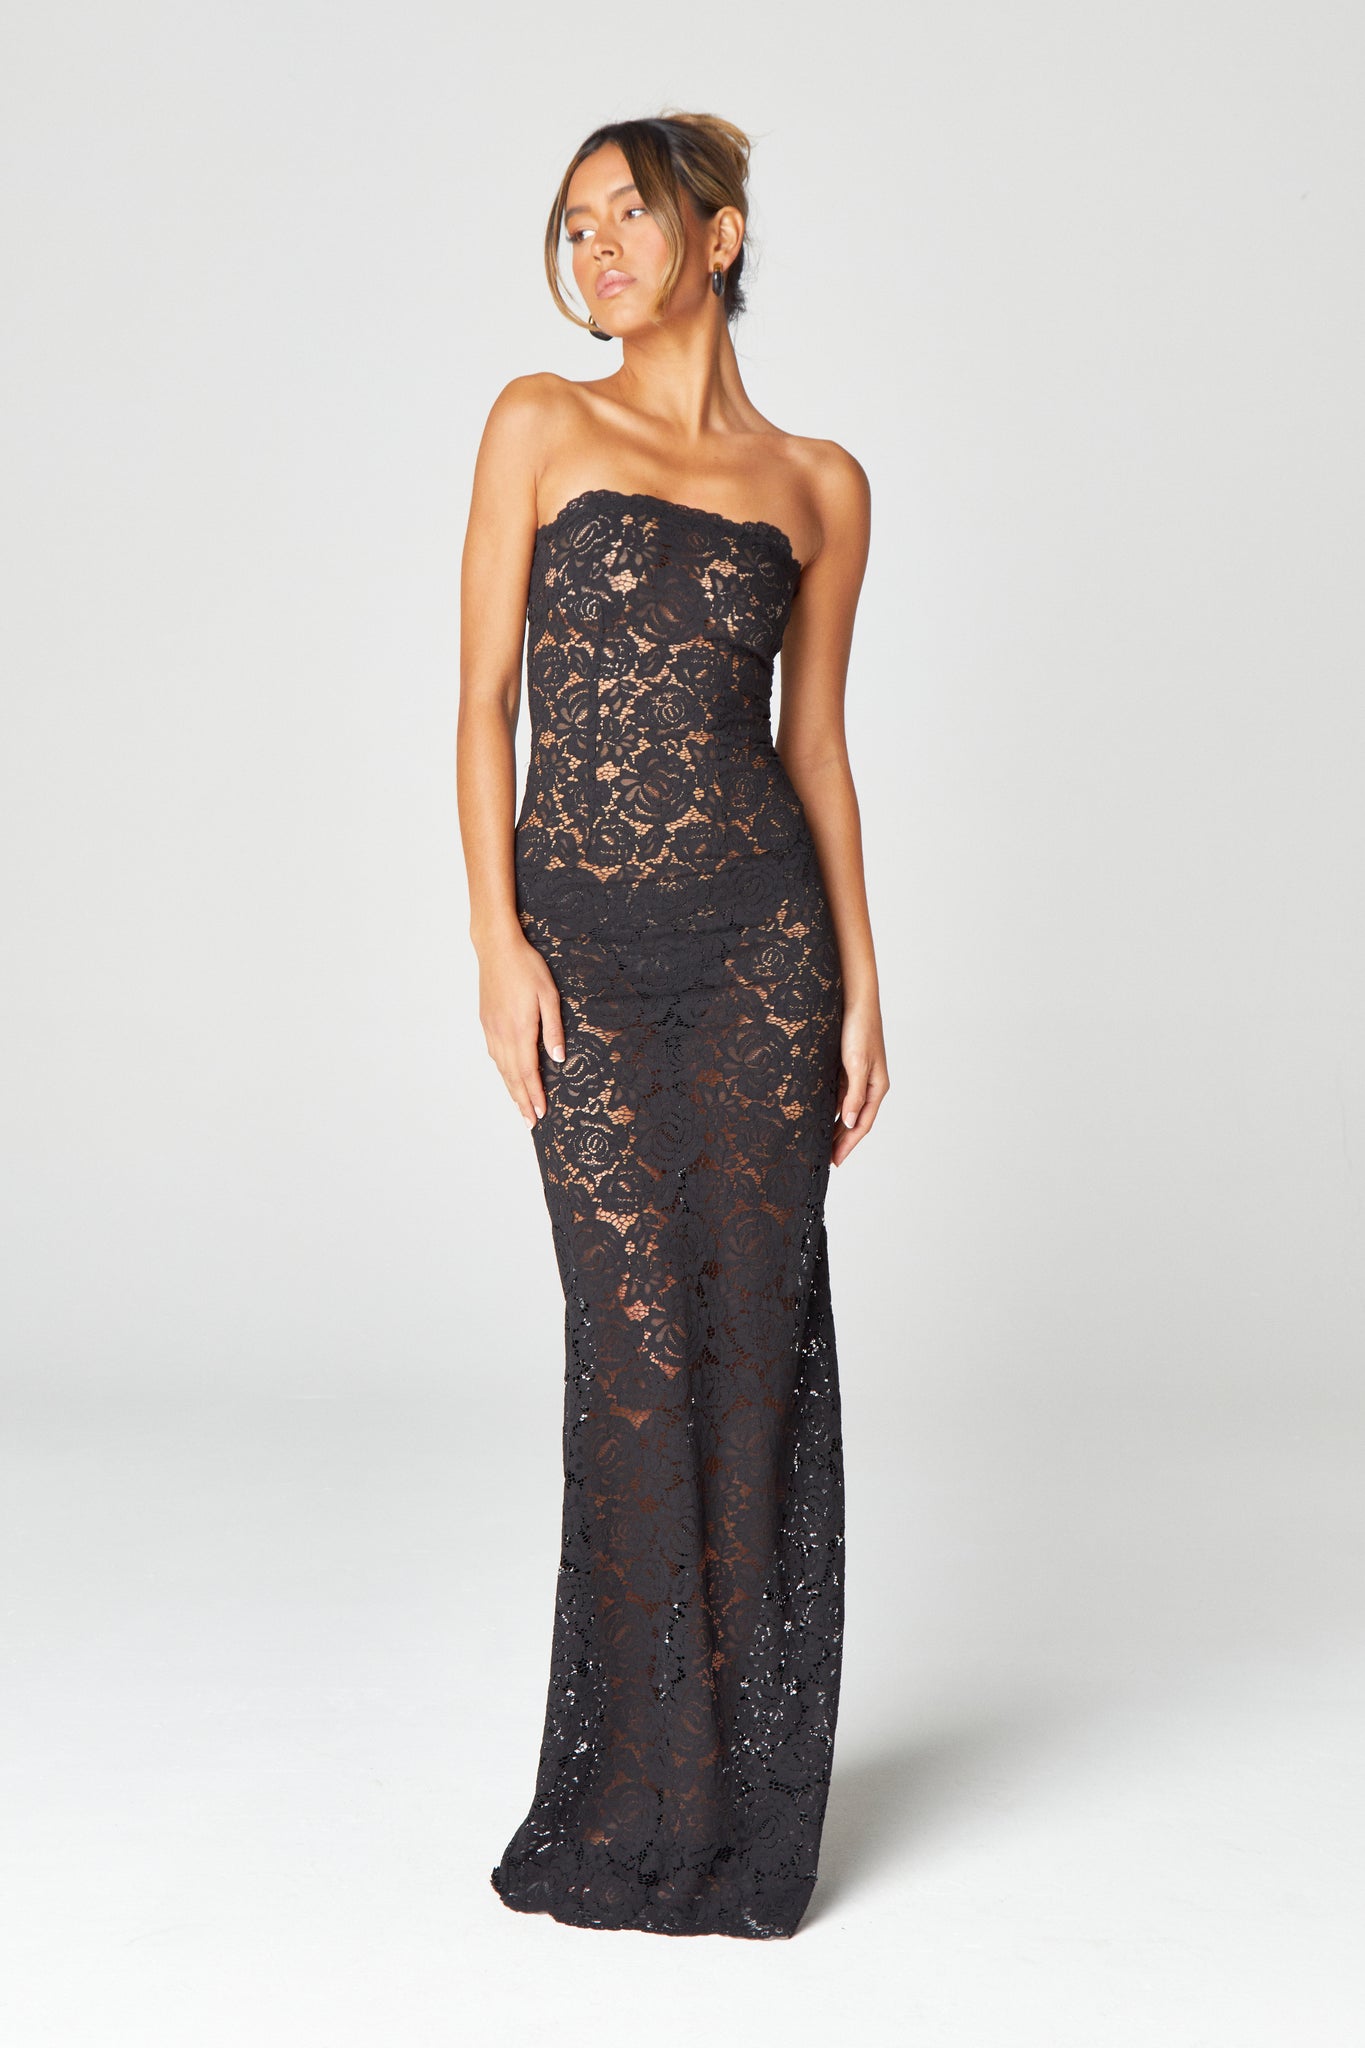 Lace Unlined Maxi Dress